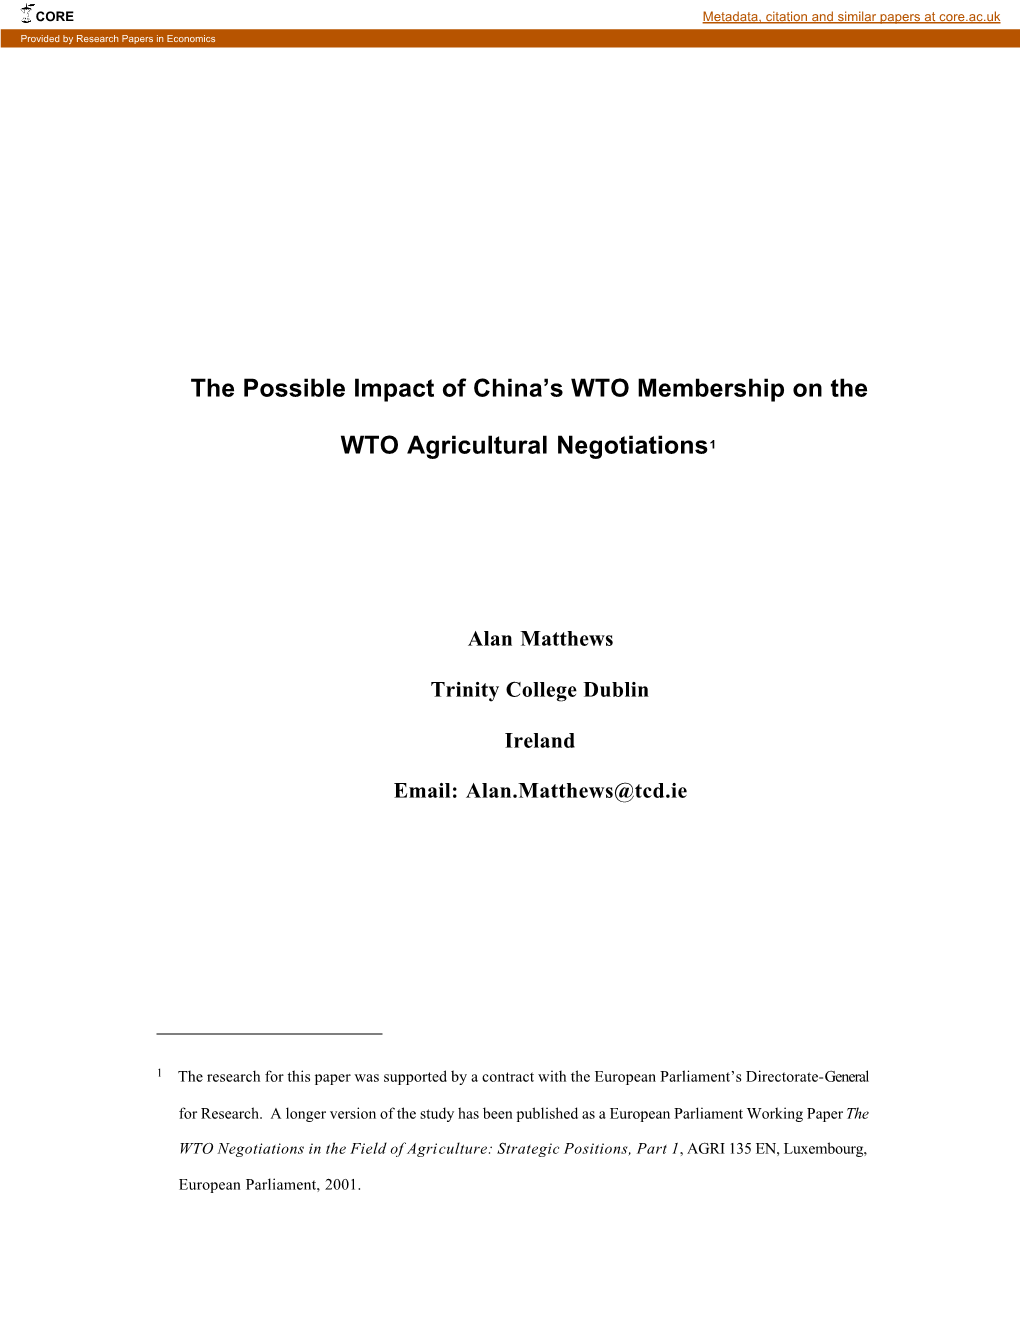 The Possible Impact of China's WTO Membership on the WTO